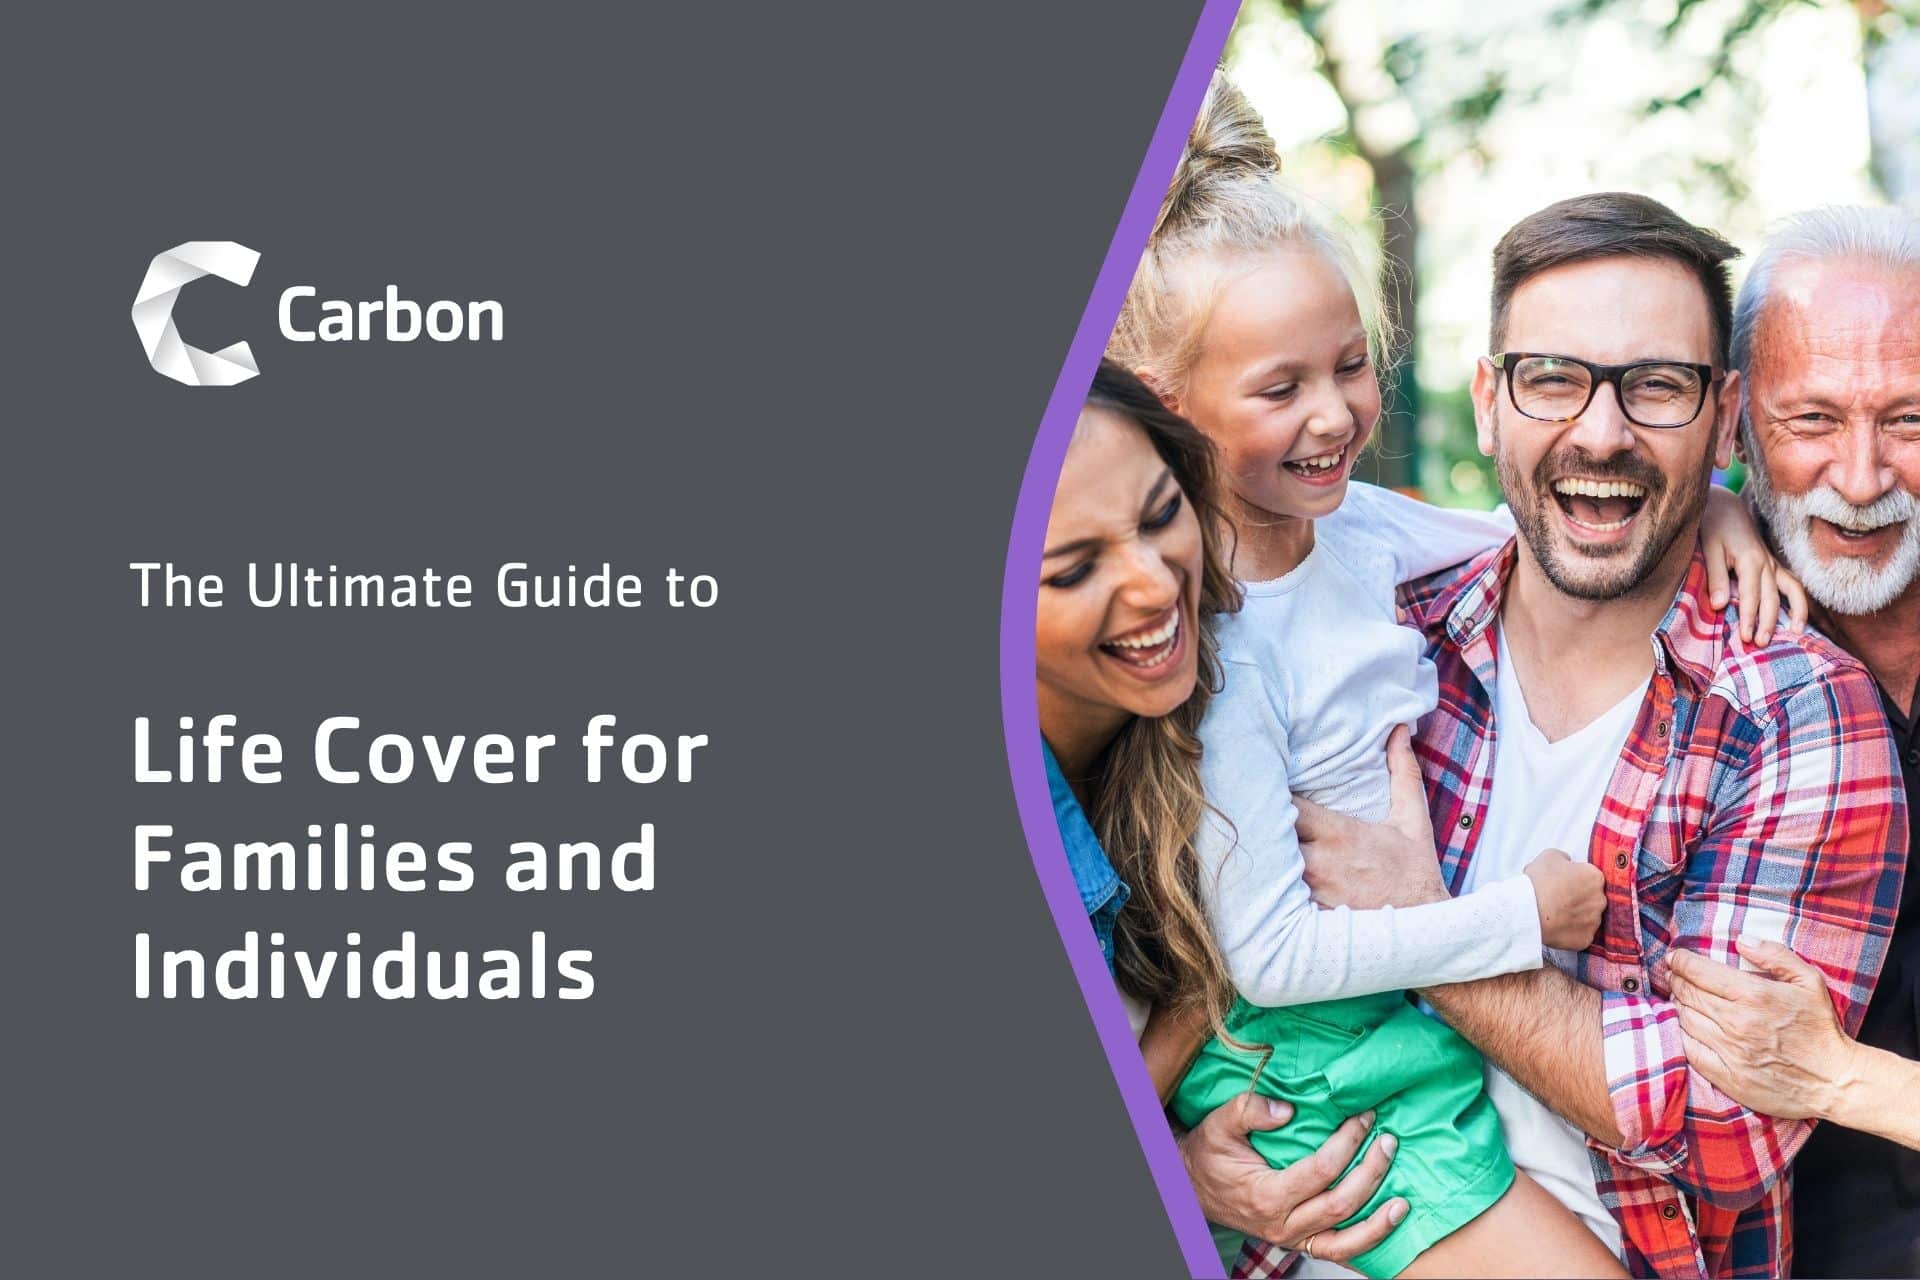 The Ultimate Guide to Life Cover for Families and Individuals